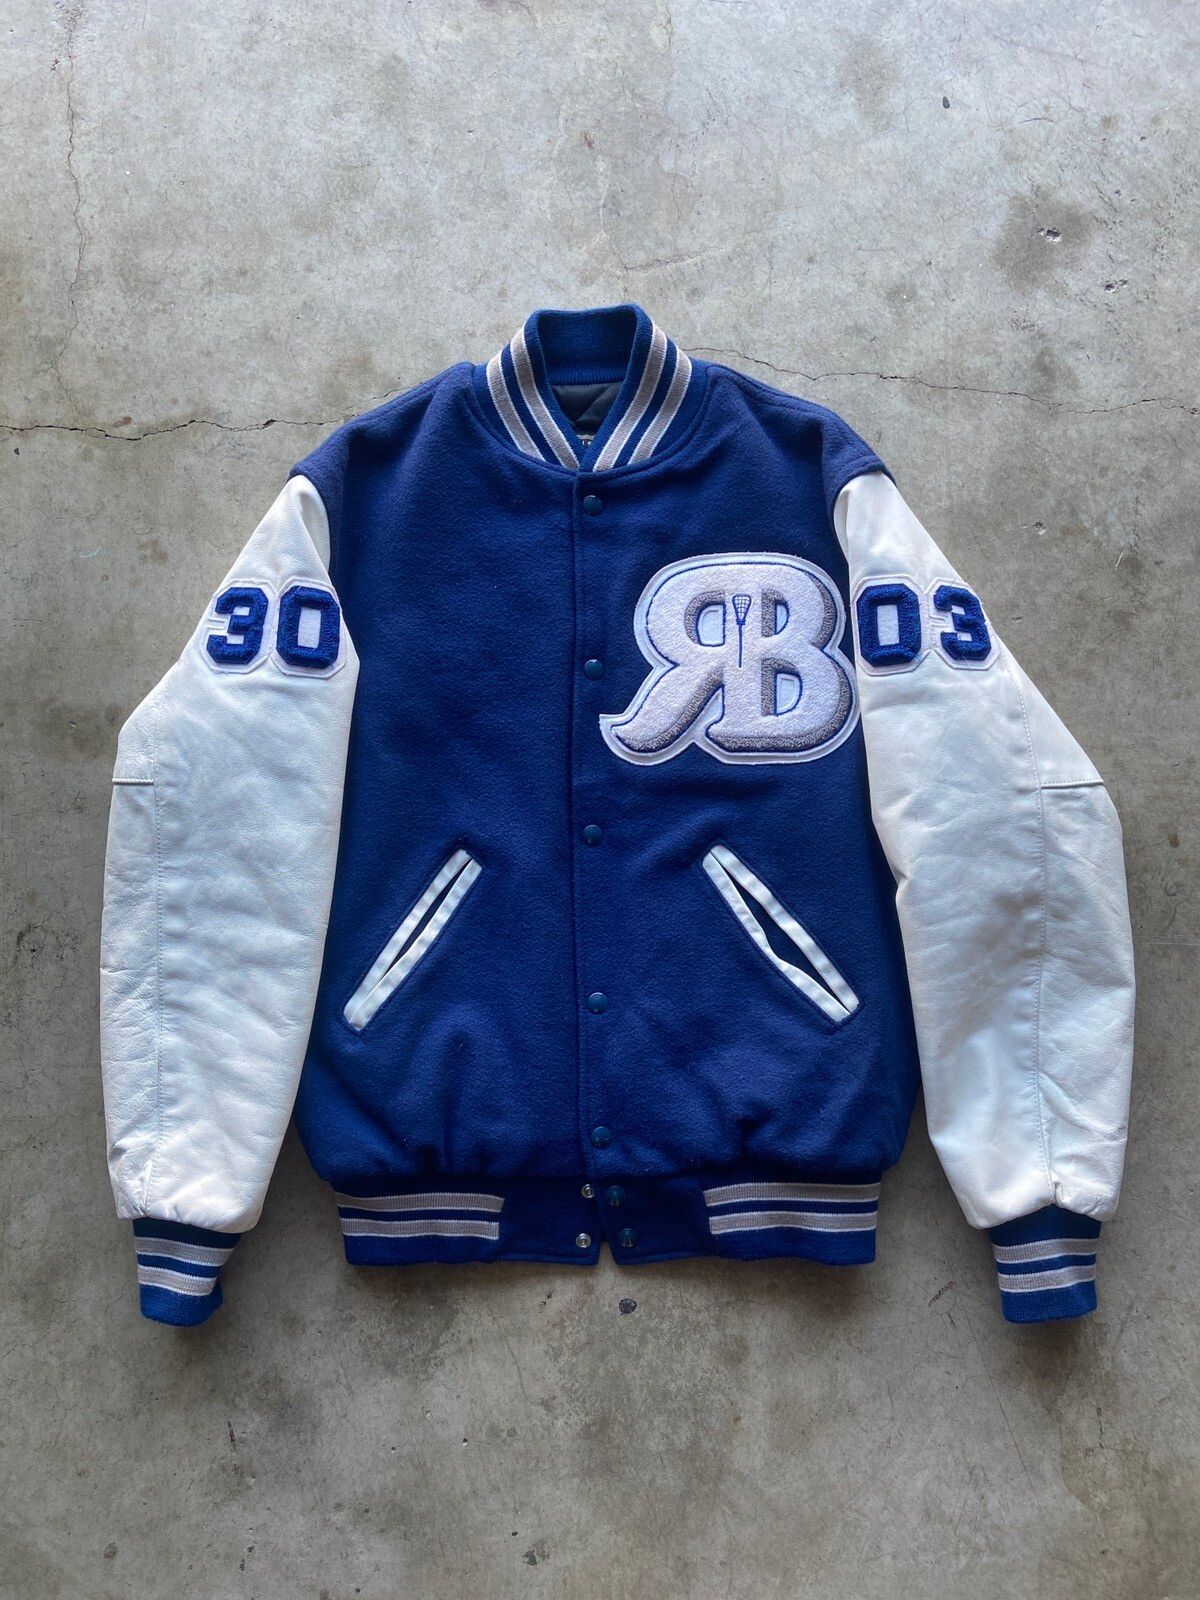 Vintage Vintage Blue Varsity Jacket Leather Sleeves Size Small Size US S / EU 44-46 / 1 - 1 Preview